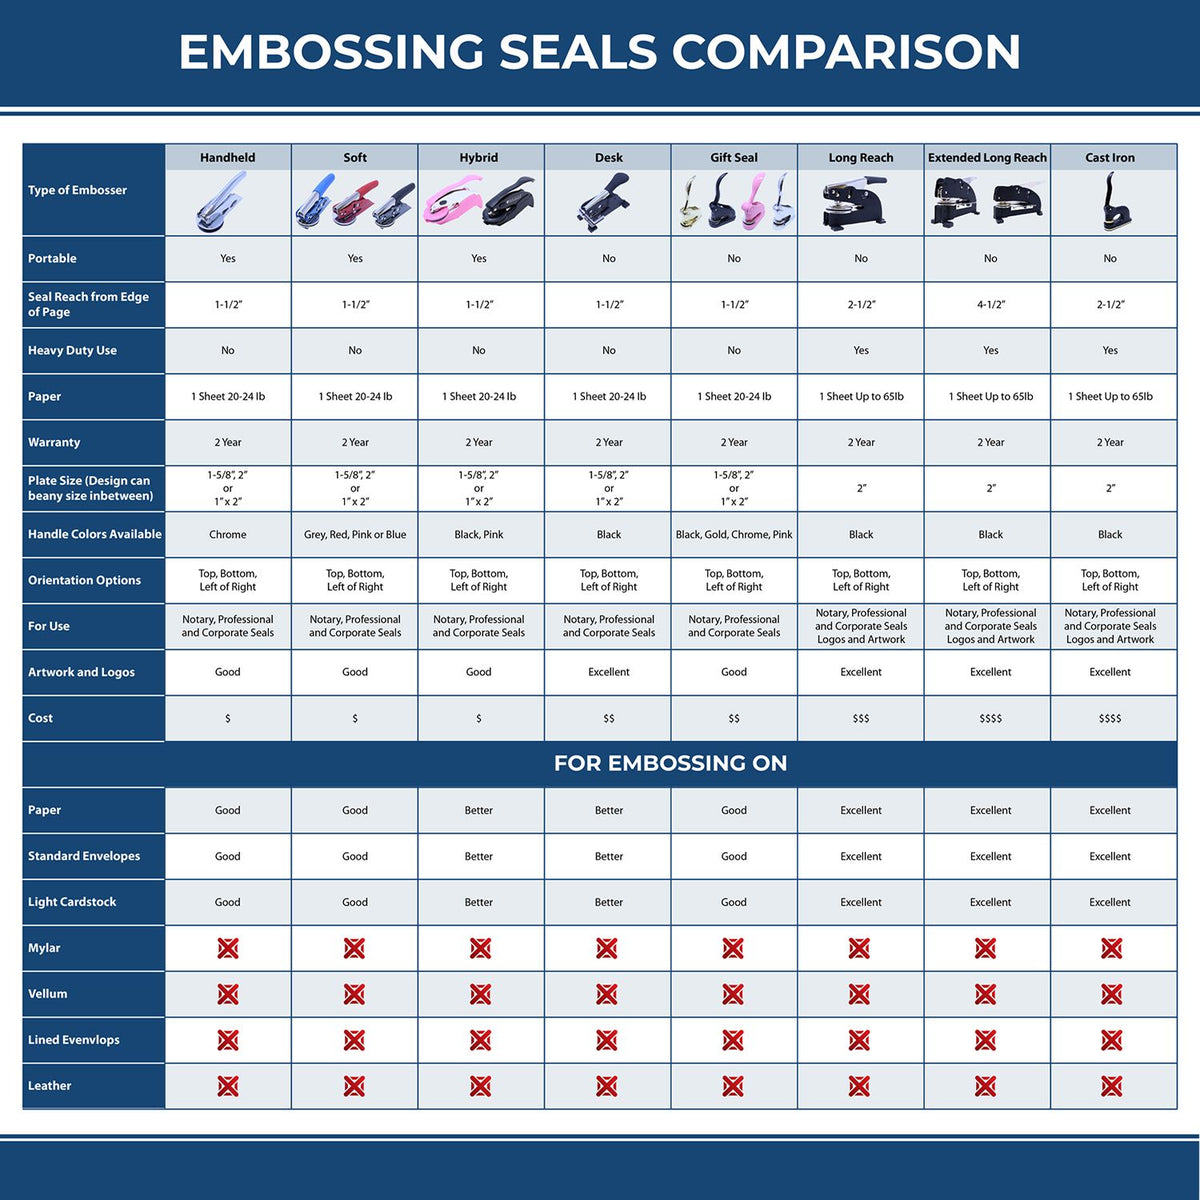 A comparison chart for the different types of mount models available for the State of Nebraska Extended Long Reach Geologist Seal